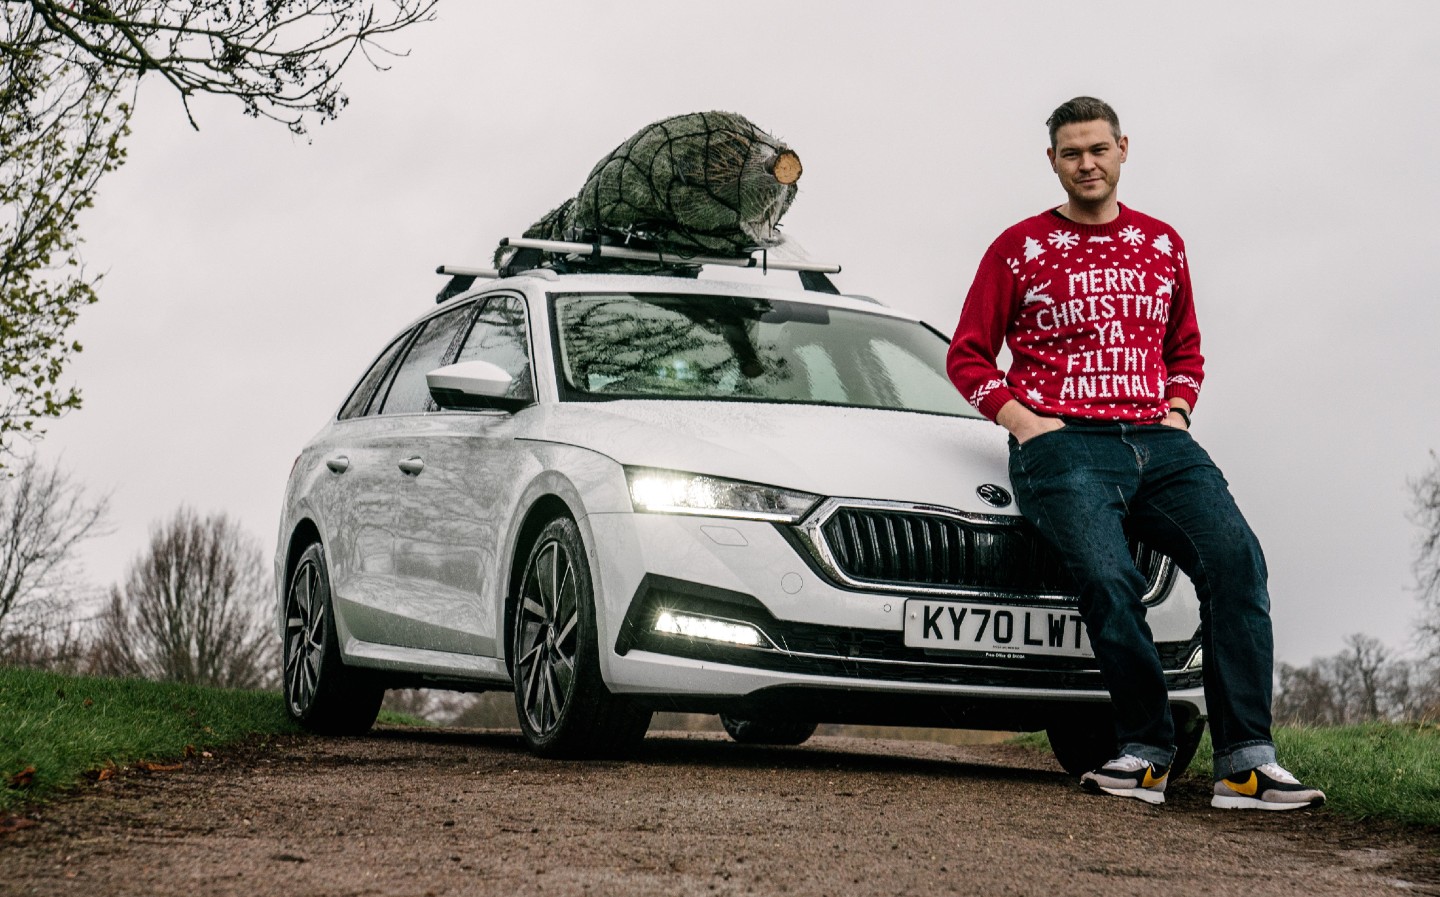 2020 Skoda Octavia iV Estate plug-in hybrid long-term review by Will Dron for Sunday Times Driving.co.uk